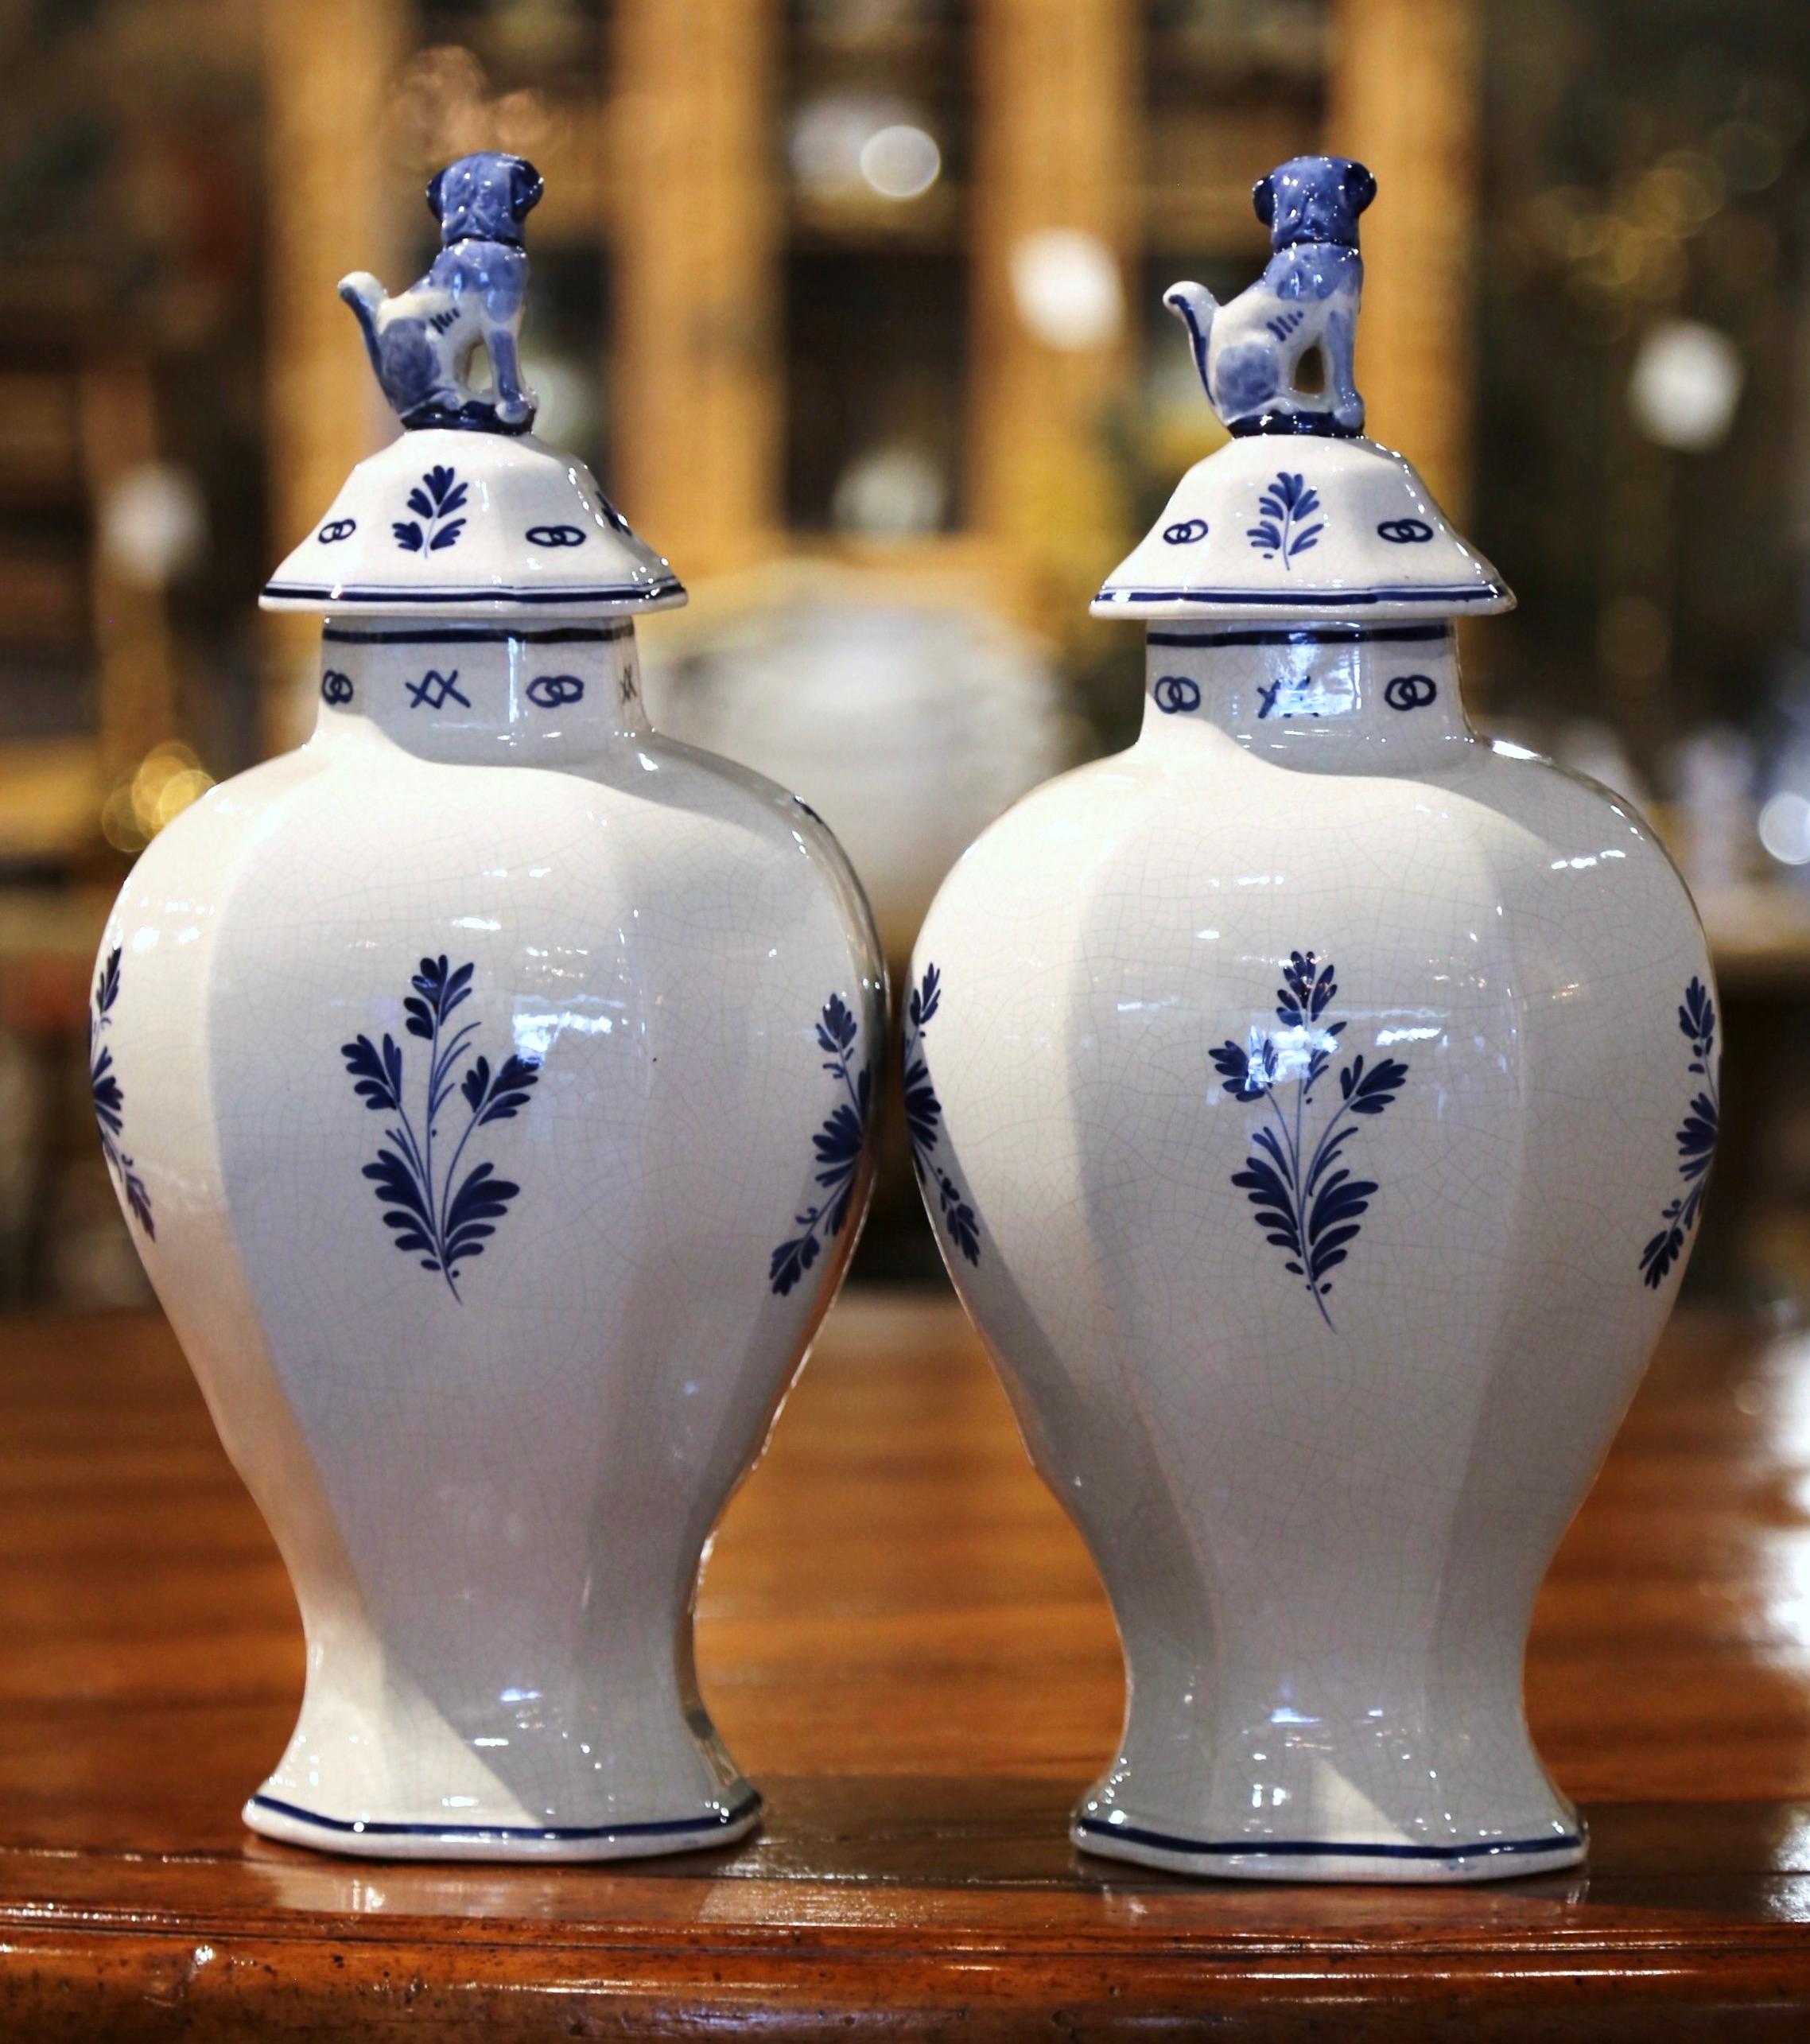 Pair of Mid-20th Century Dutch Blue and White Hand-Painted Delft Ginger Jars 1